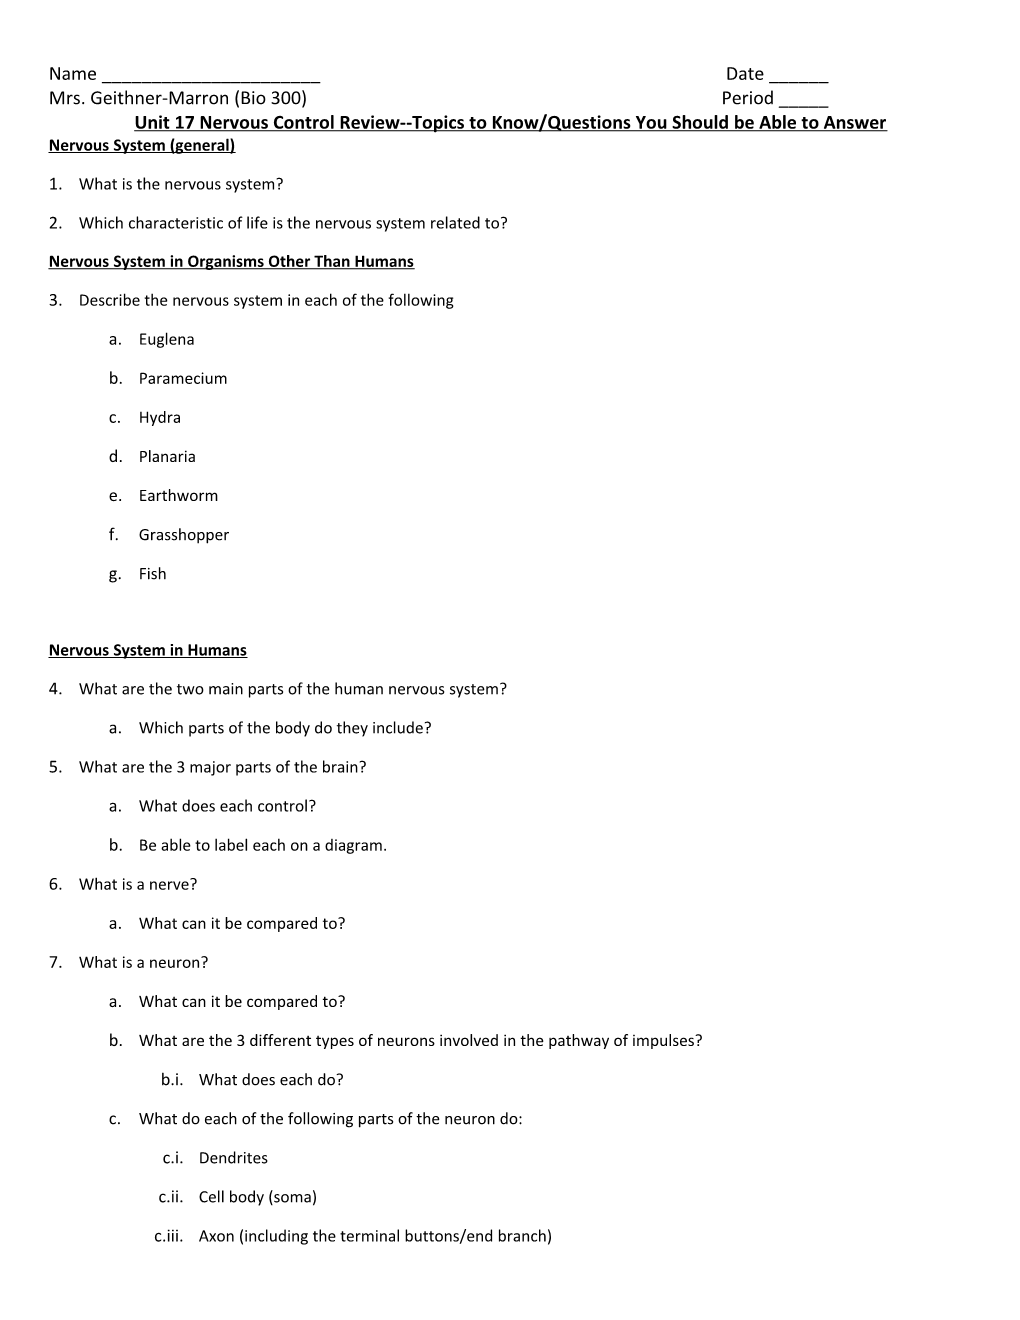 Unit 17 Nervous Control Review Topics to Know/Questions You Should Be Able to Answer